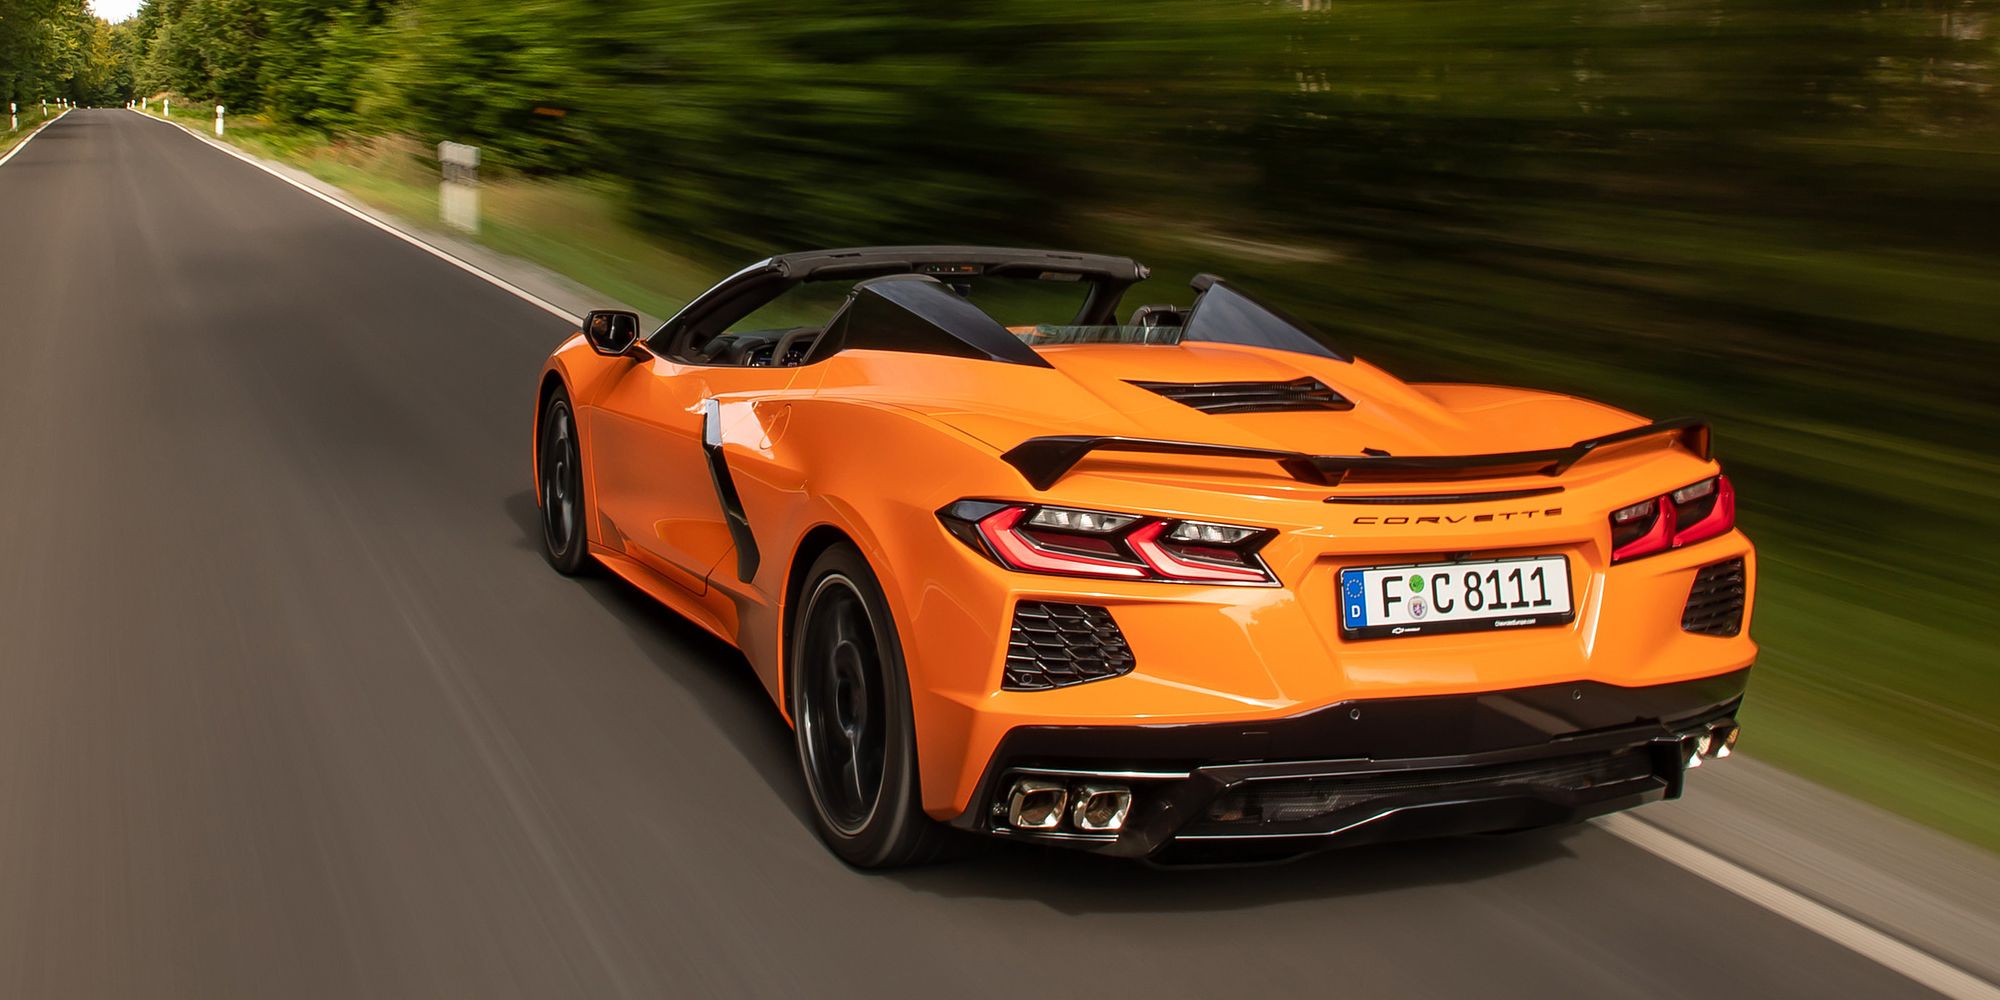 The rear of the Stingray Convertible on the move